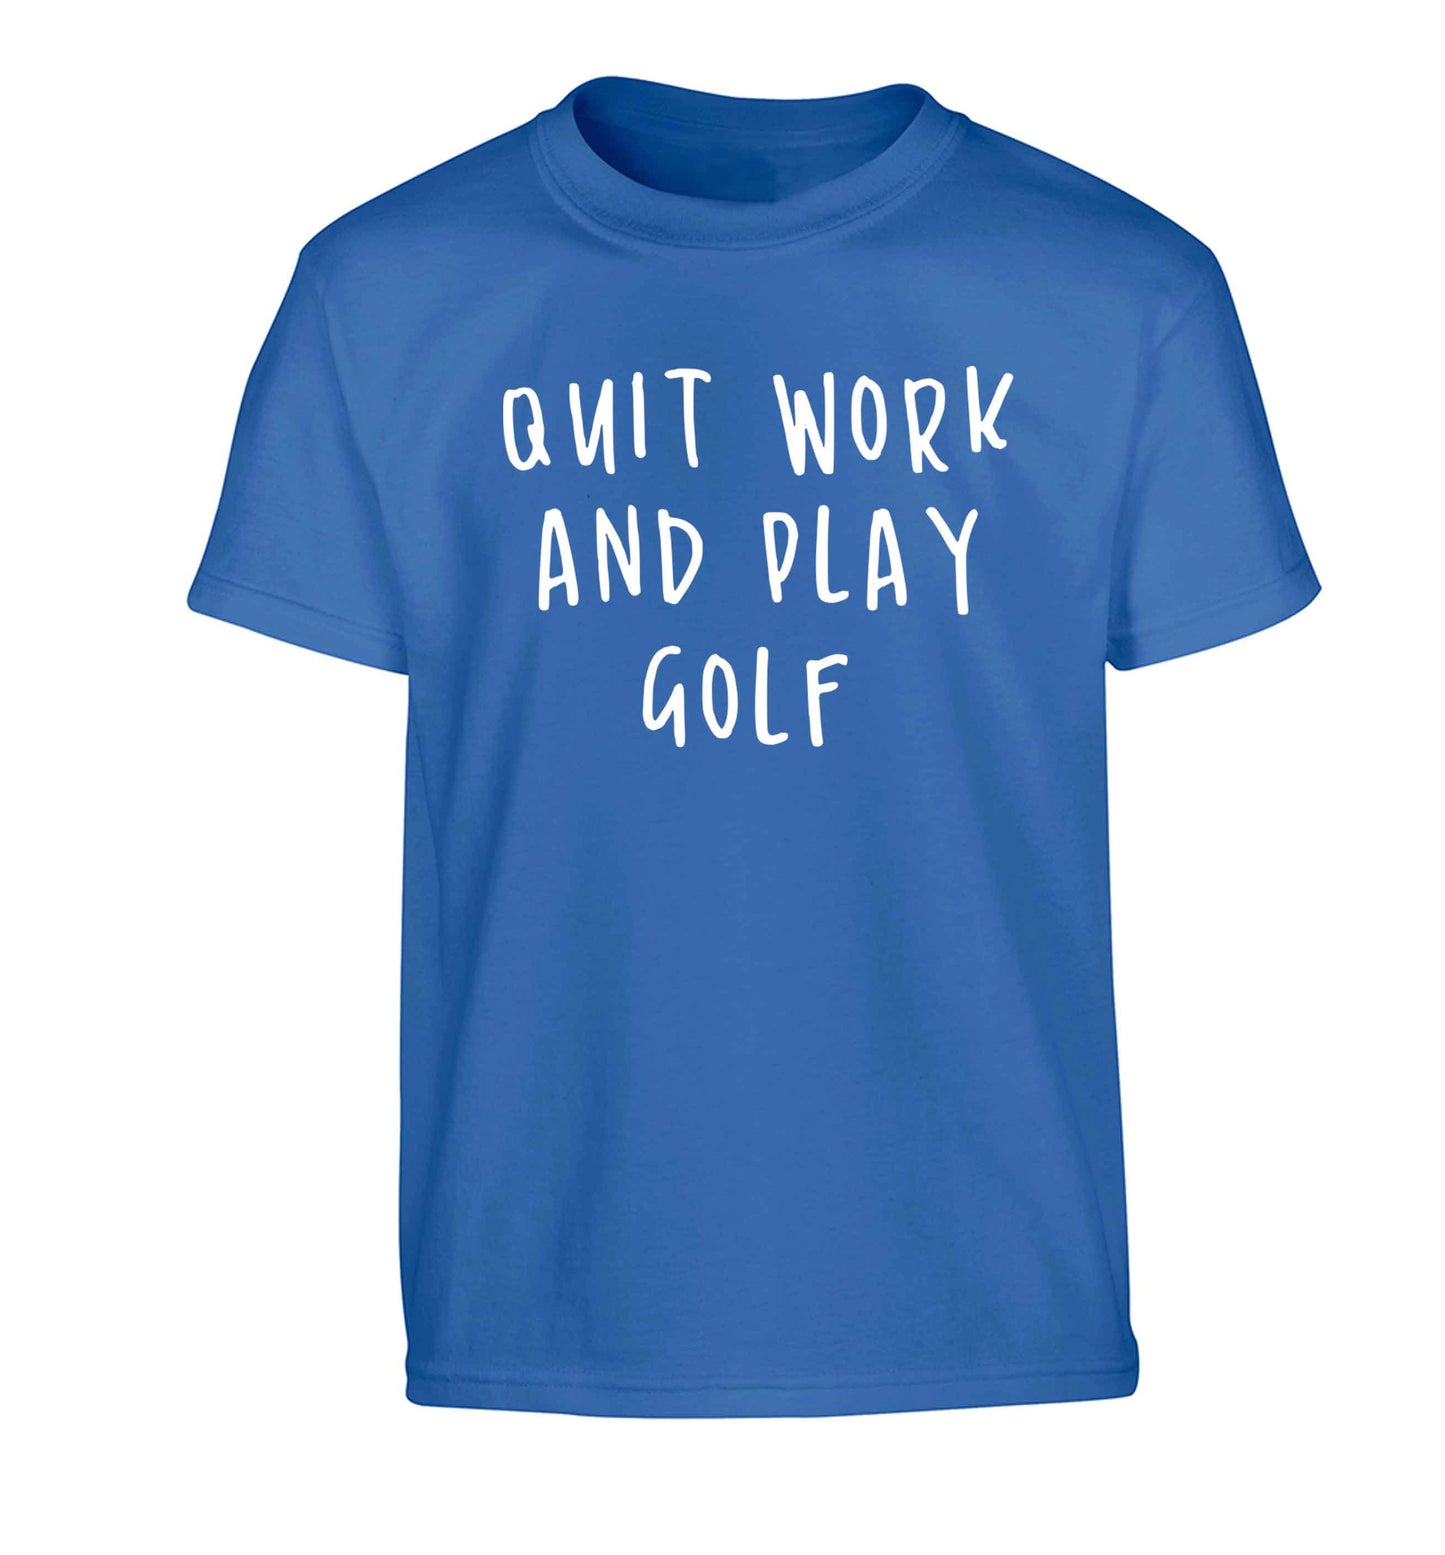 Quit work and play golf Children's blue Tshirt 12-13 Years